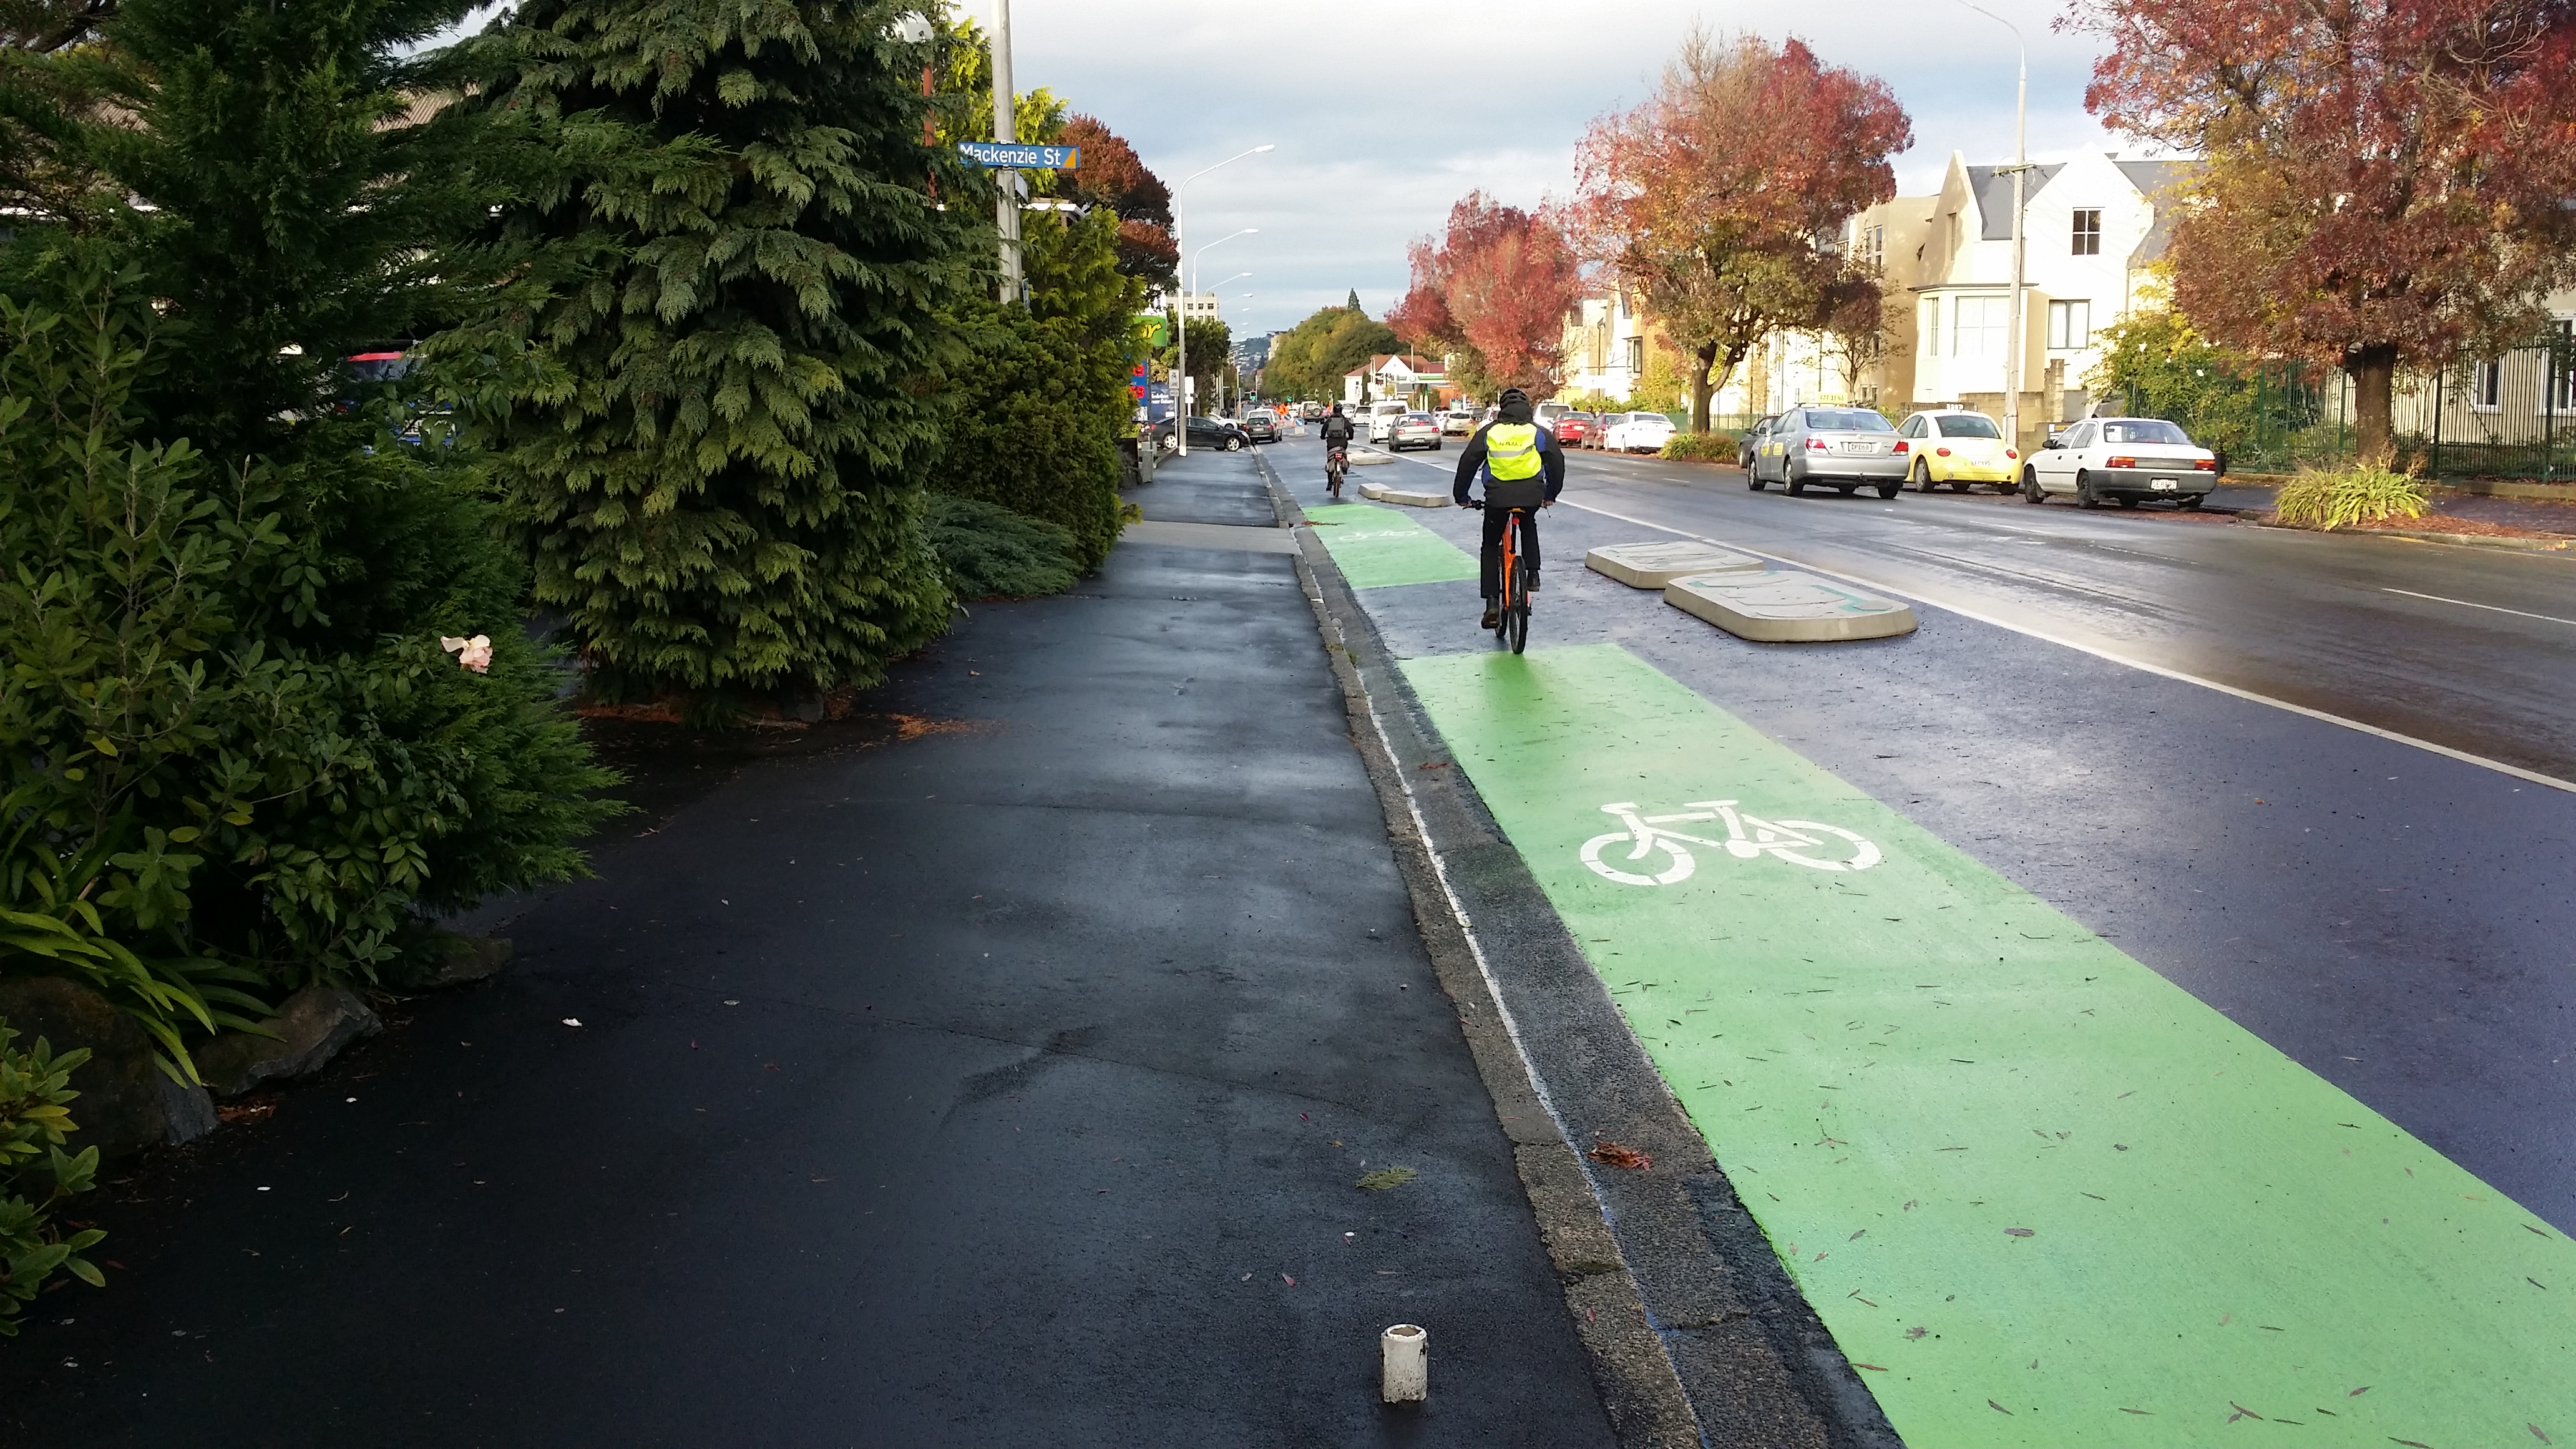 Separated cycle lanes